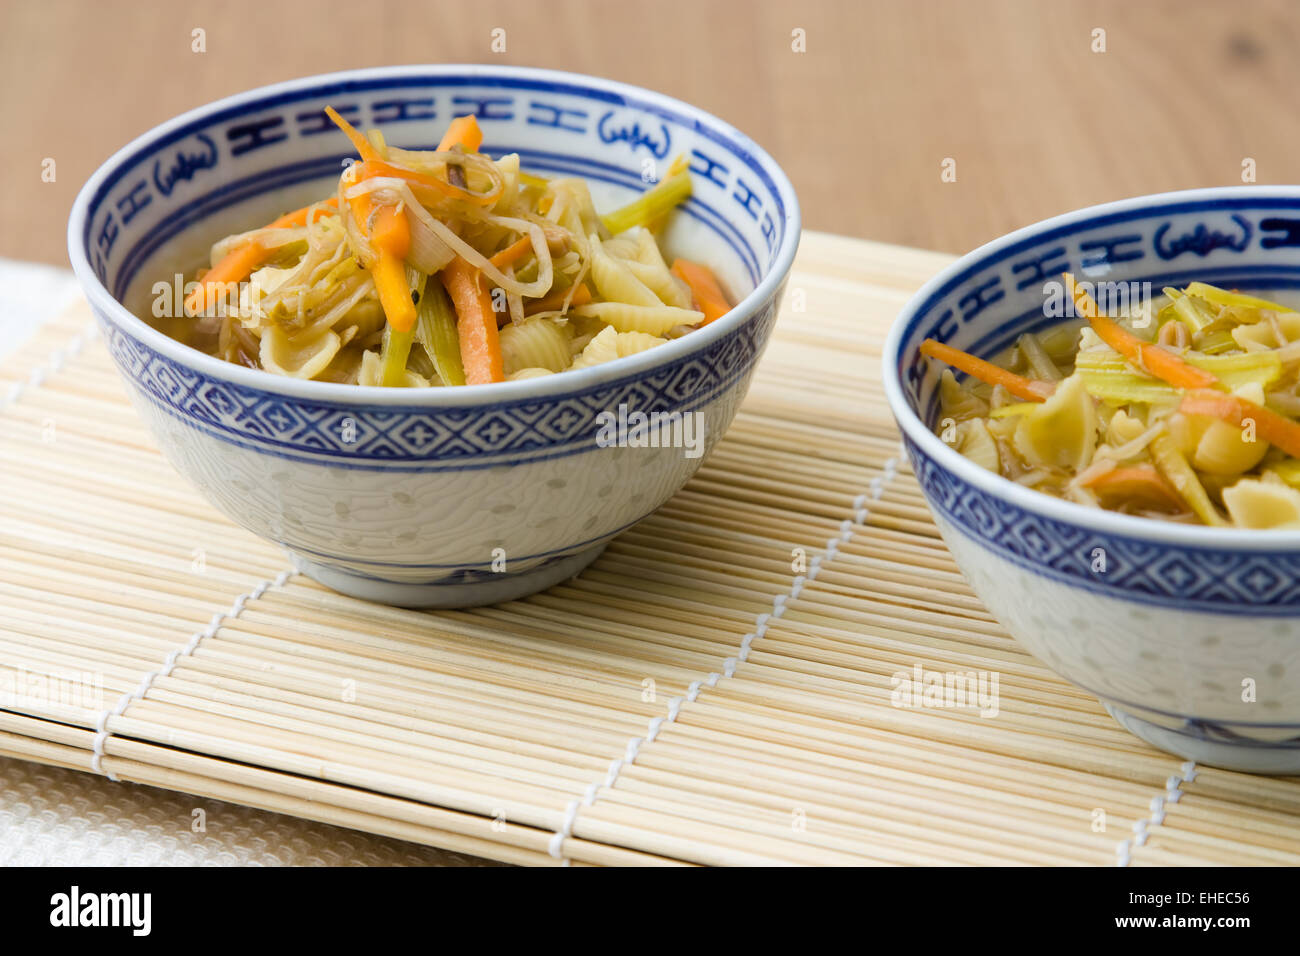 Asiatische Nudelsuppe - Asian Noodle Soup Stock Photo